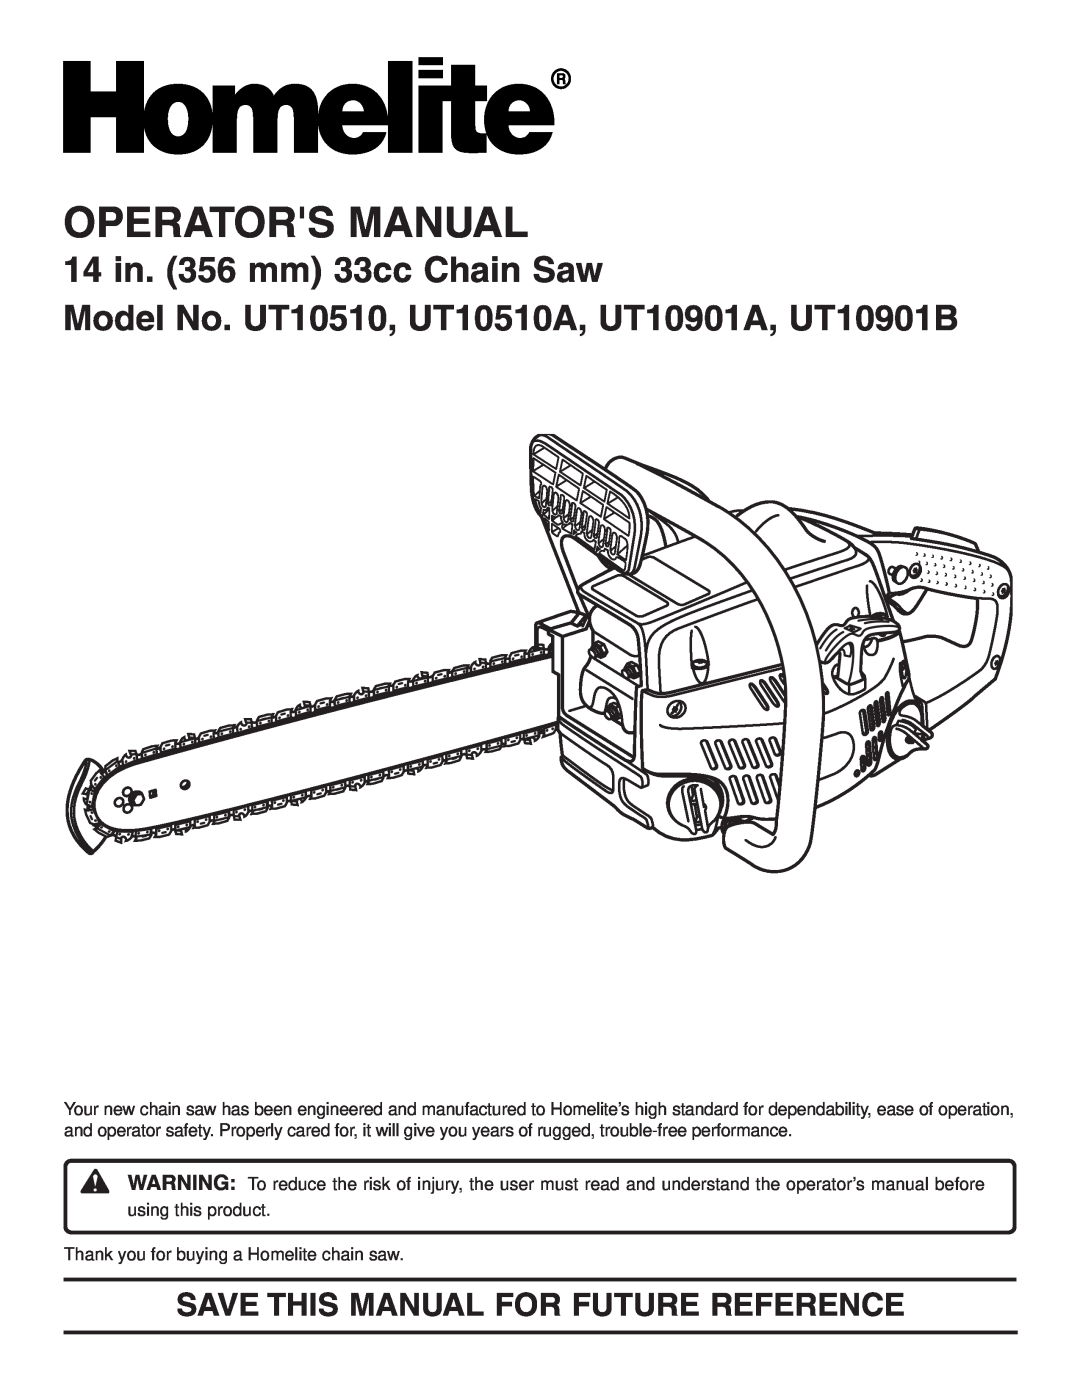 Homelite UT10510A manual Save This Manual For Future Reference, Operators Manual, 14 in. 356 mm 33cc Chain Saw 